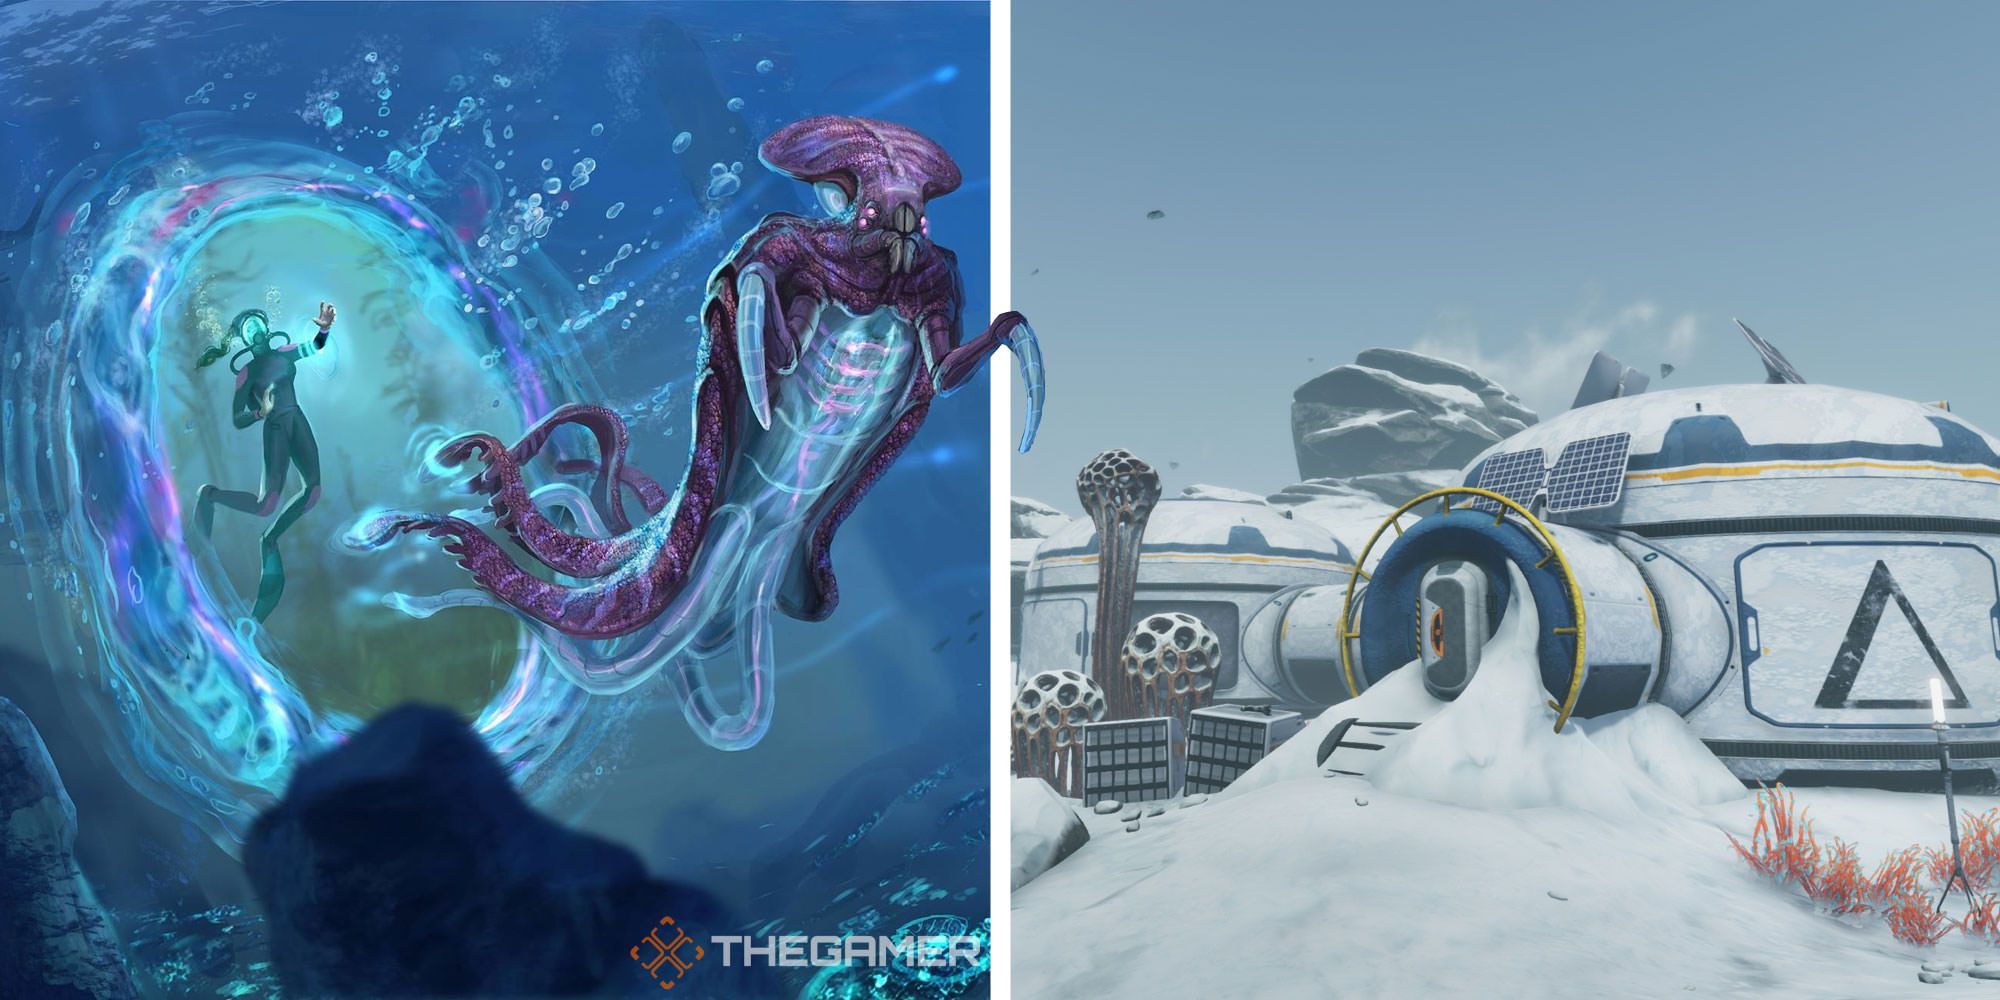 subnautica below zero map size compared to the first oen